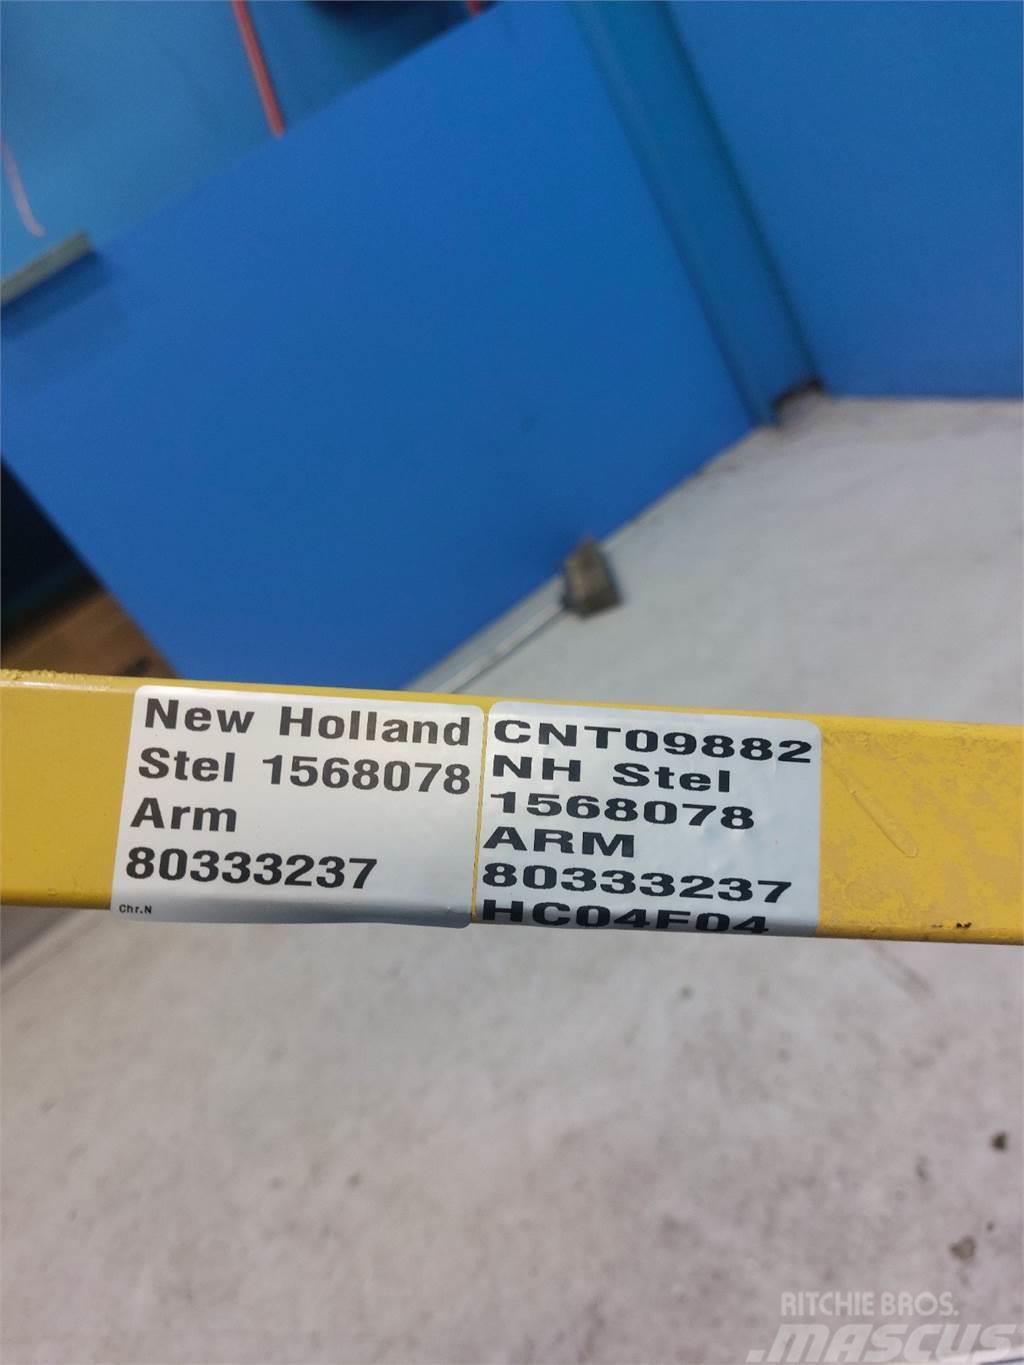 New Holland 8070 Combine harvester spares & accessories